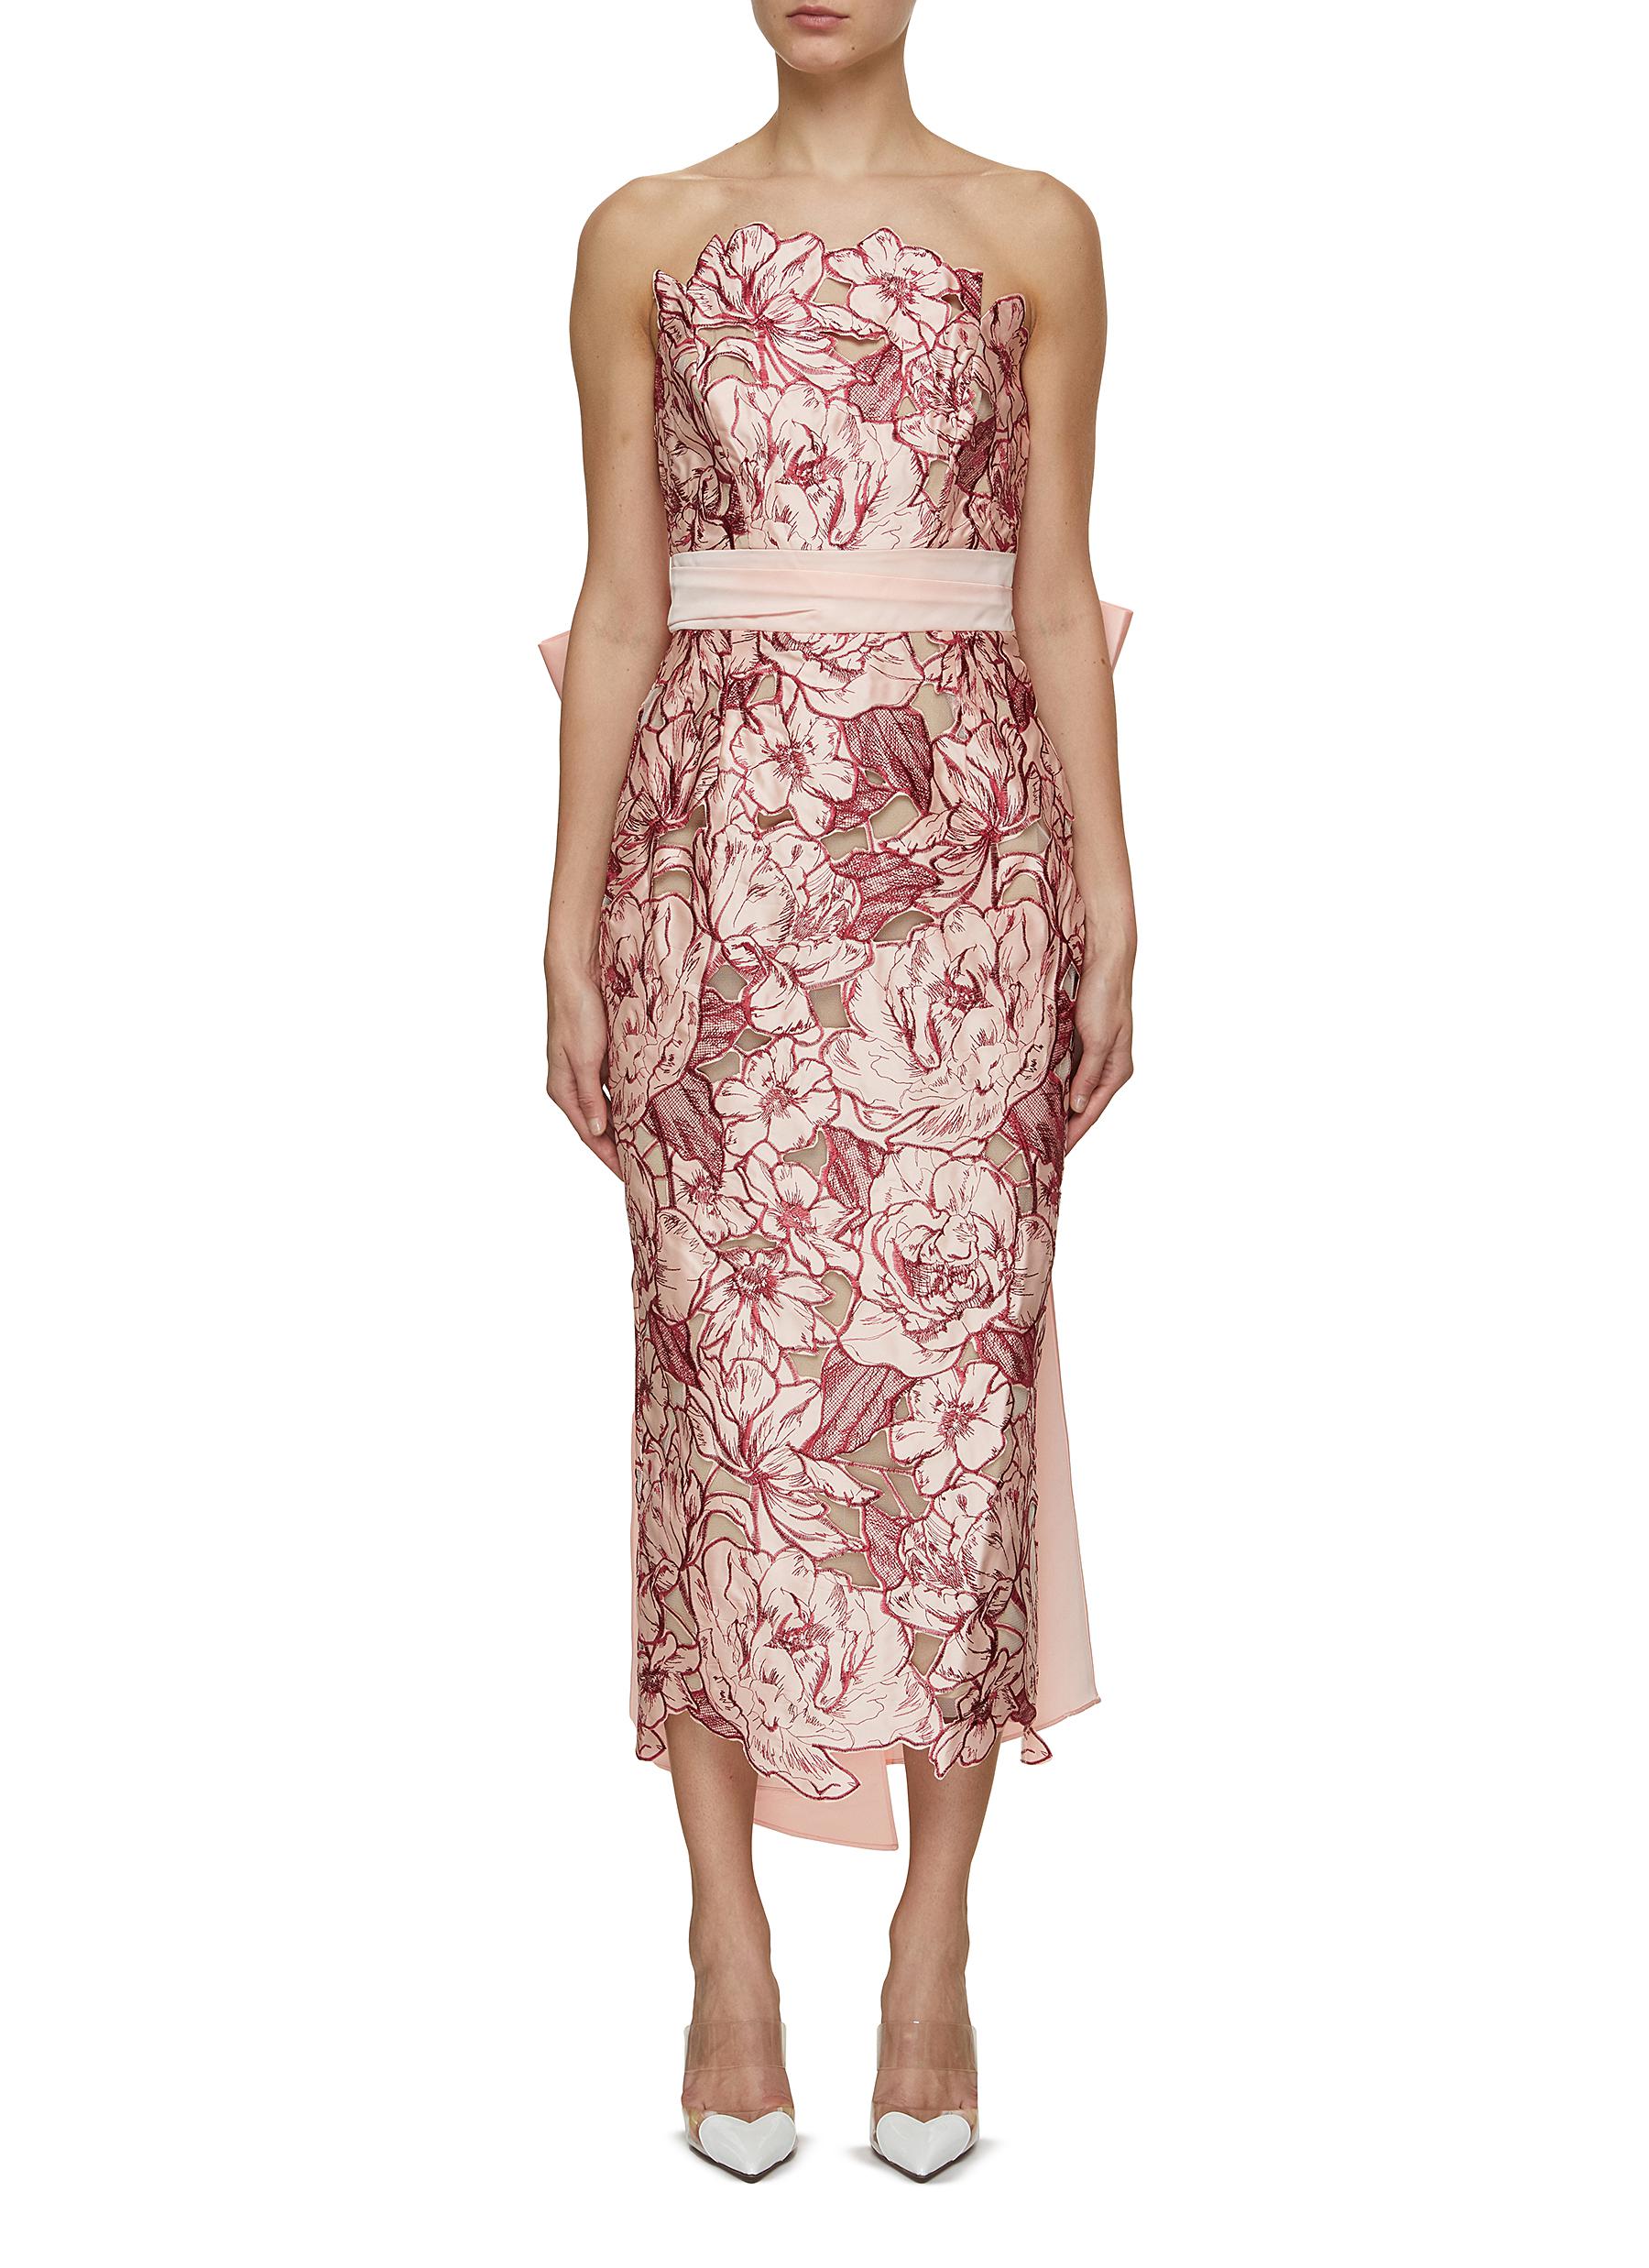 Tulips and Anemones Embroidered Midi Dress